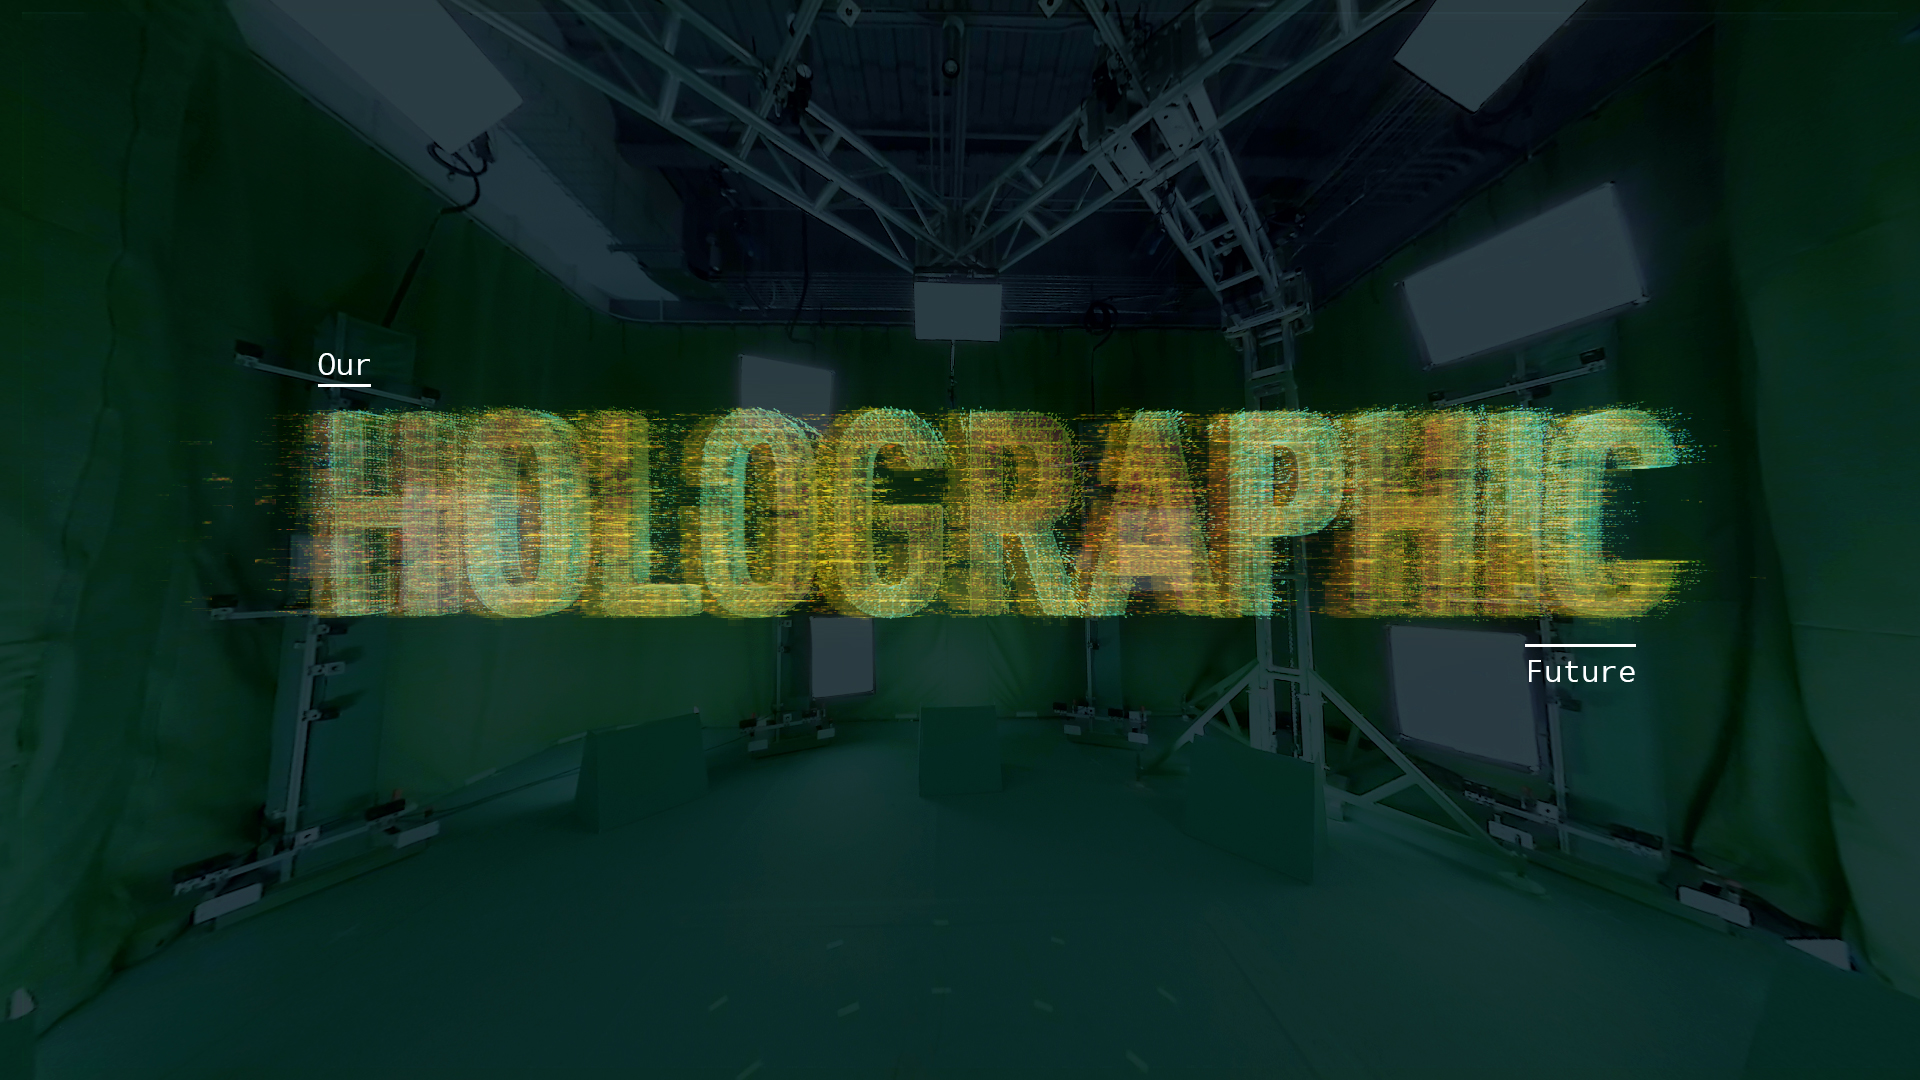 An illustration shows the words "Our Holographic Future"